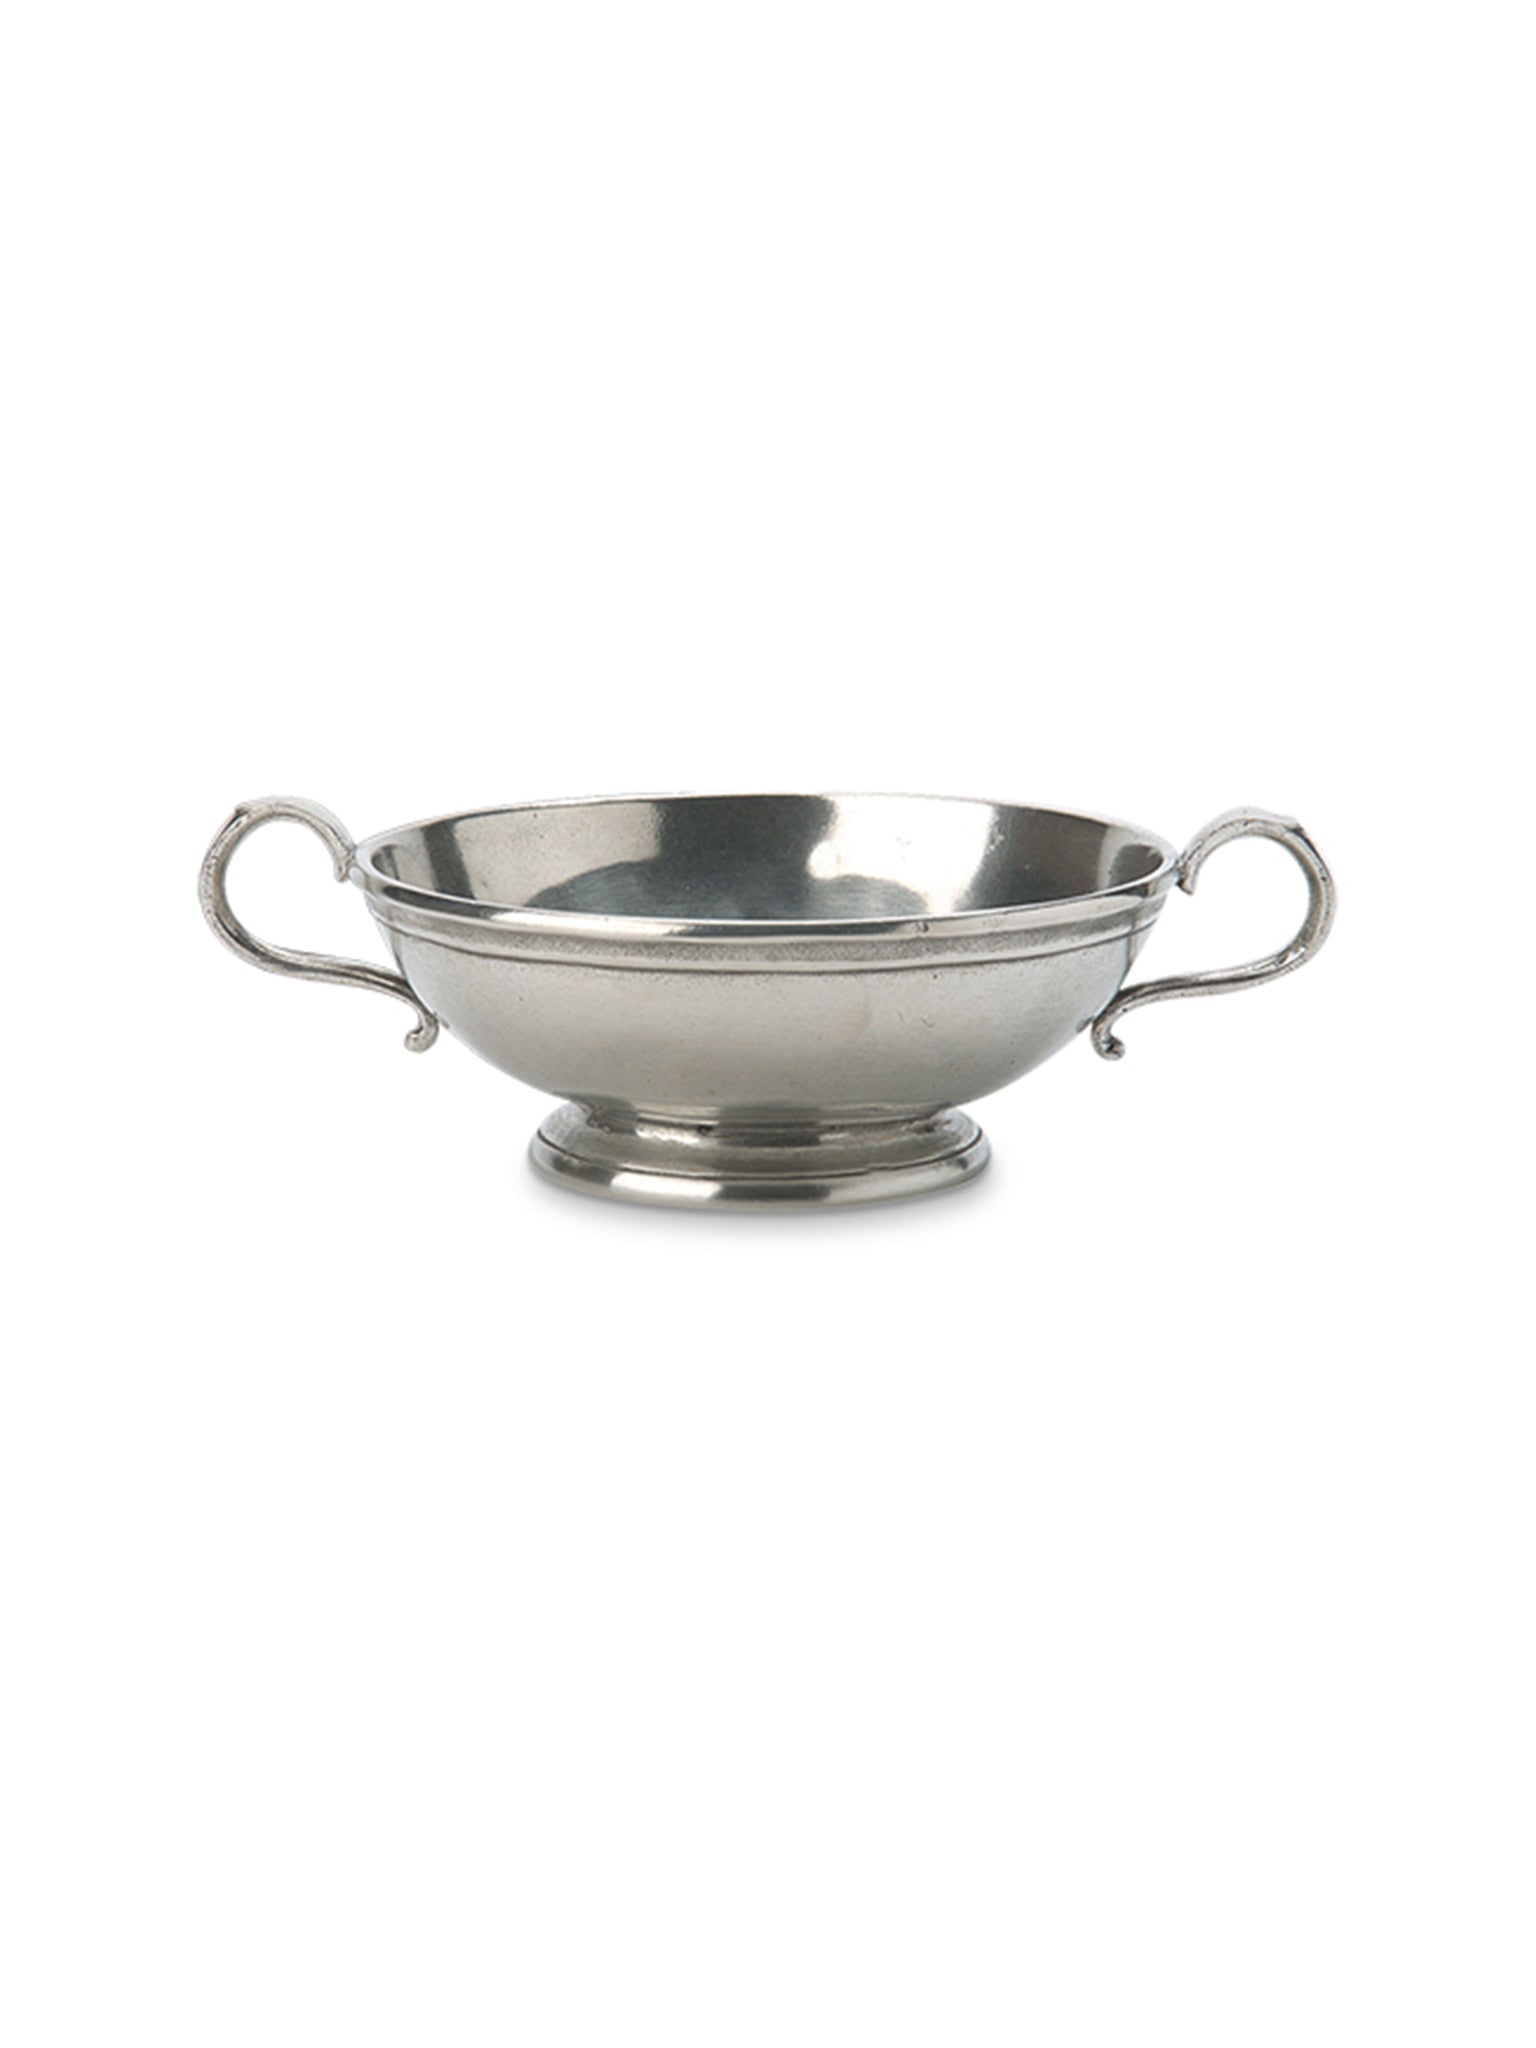 MATCH Pewter Low Footed Bowl Small Weston Table